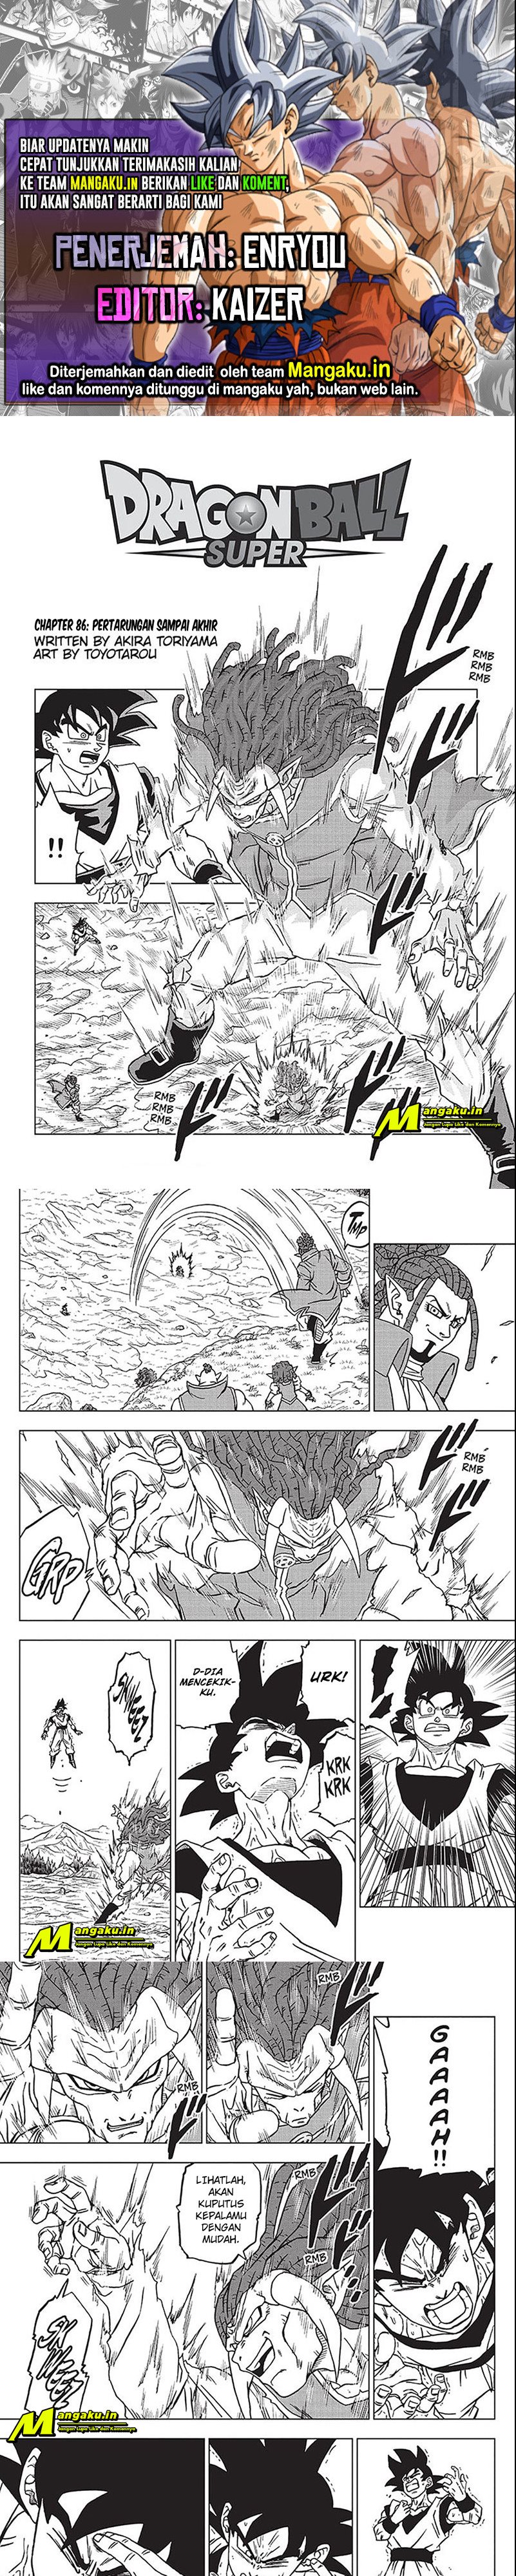 Dragon Ball Super: Chapter 86.1 - Page 1